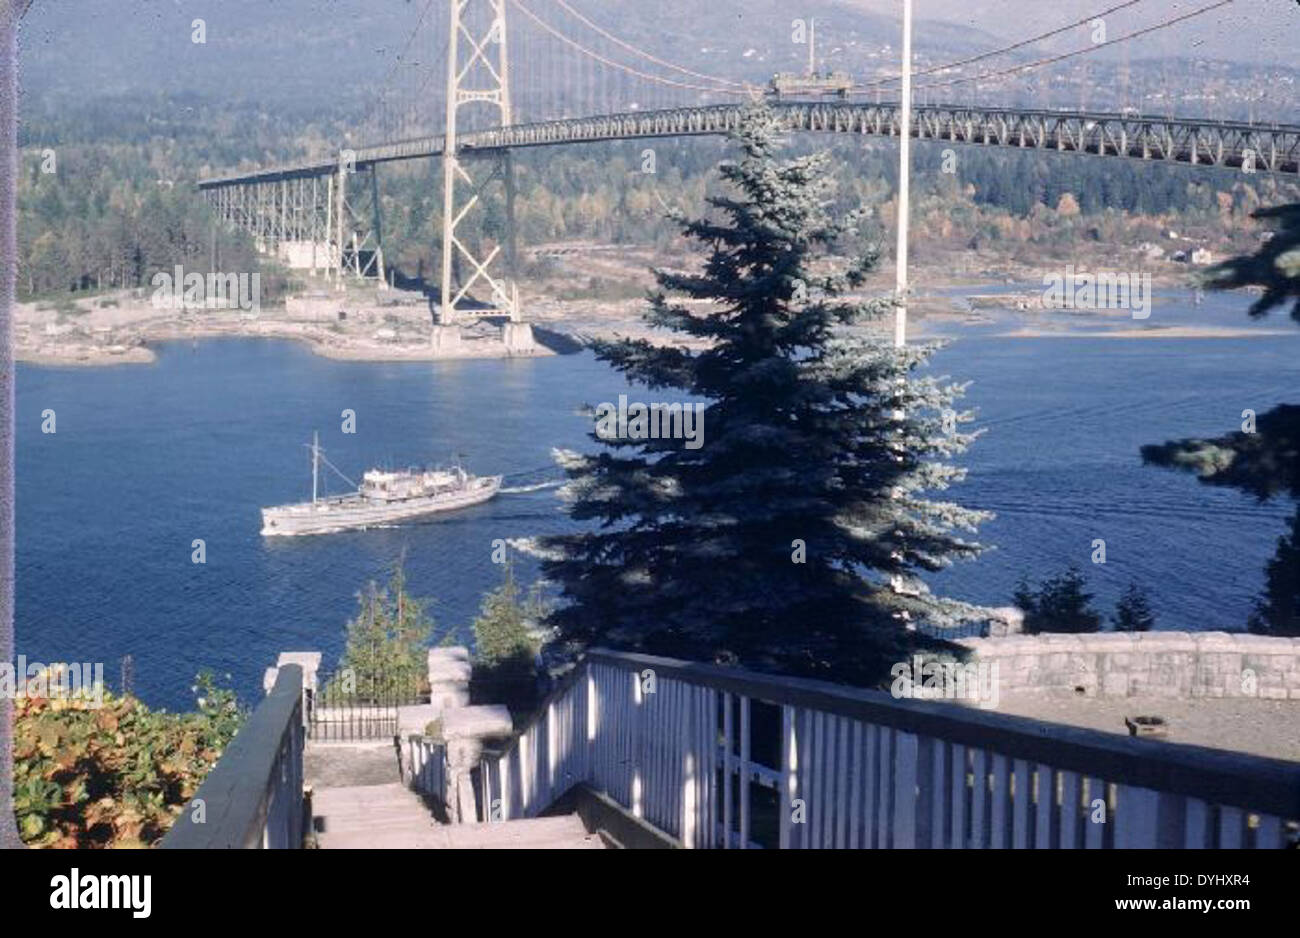 Jack Canary Special Collection Photo Lions Gate Bridge, Vancouver Stock Photo